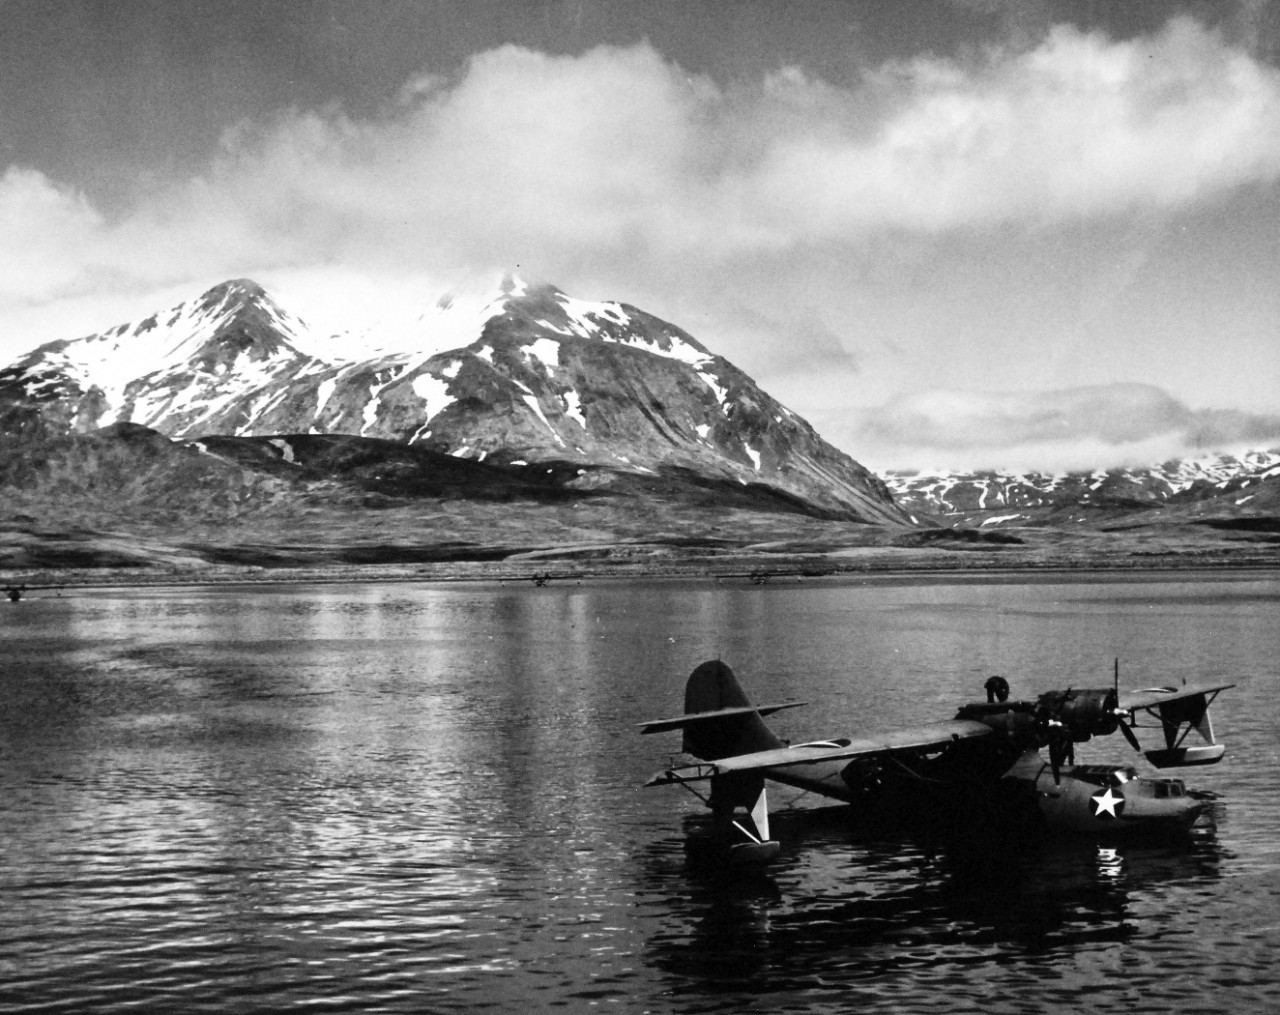 80-G-475732:  PBY-5 “Catalina” patrol bomber, July 1943.   PBY-5 anchored near seaplane tender in Attu Harbor in Aleutians  Photographed by Lieutenant Horace Bristol, July 1943.  TR-5223.  U.S. Navy photograph, now in the collections of the National Archives.  (2015/11/17).